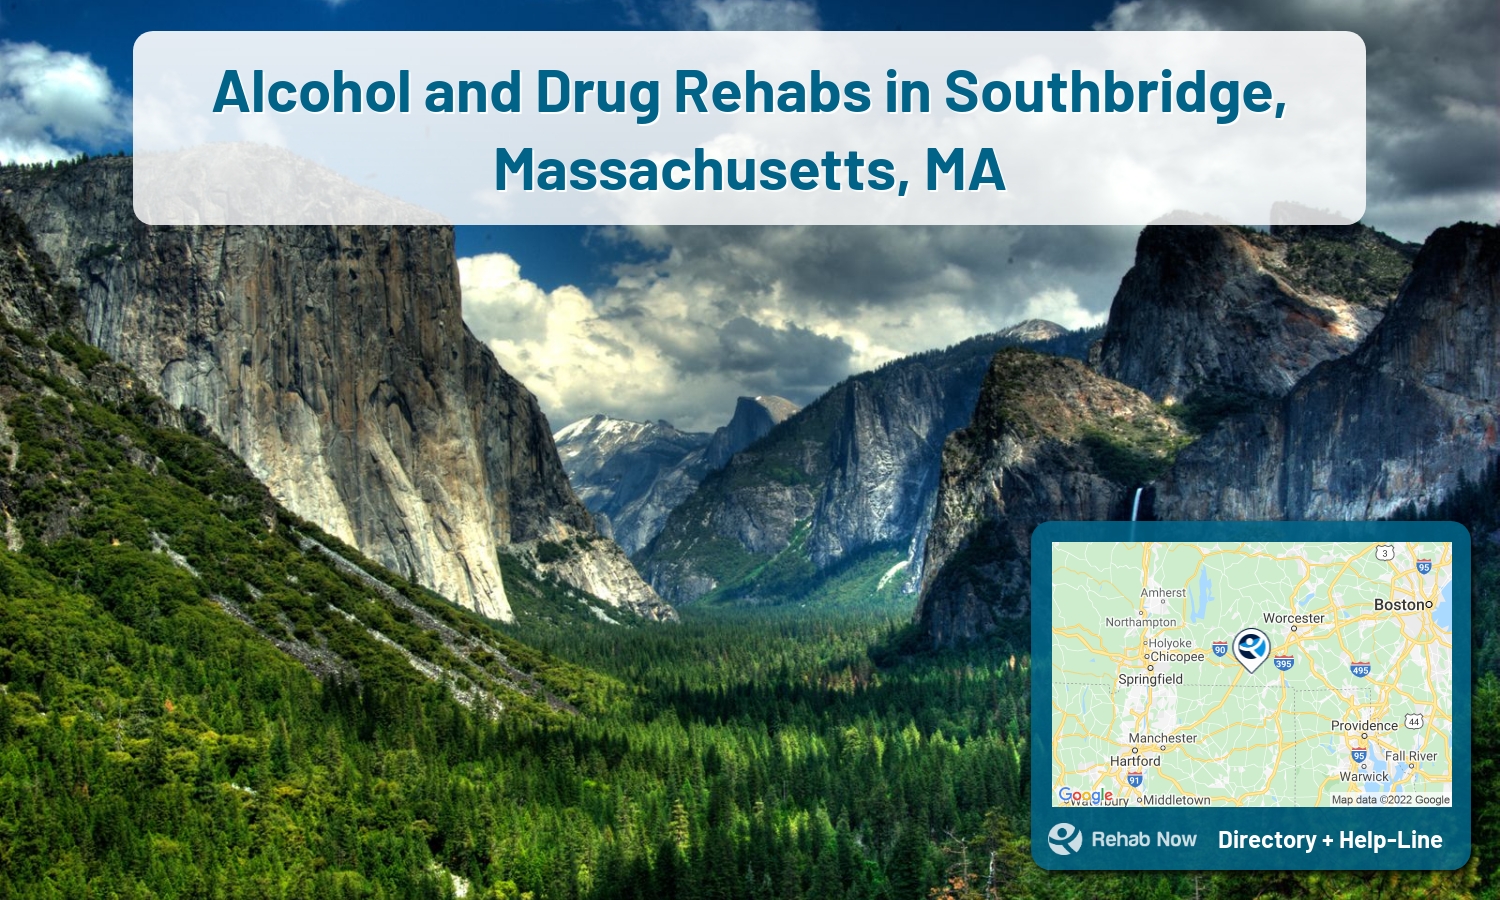 Ready to pick a rehab center in Southbridge? Get off alcohol, opiates, and other drugs, by selecting top drug rehab centers in Massachusetts